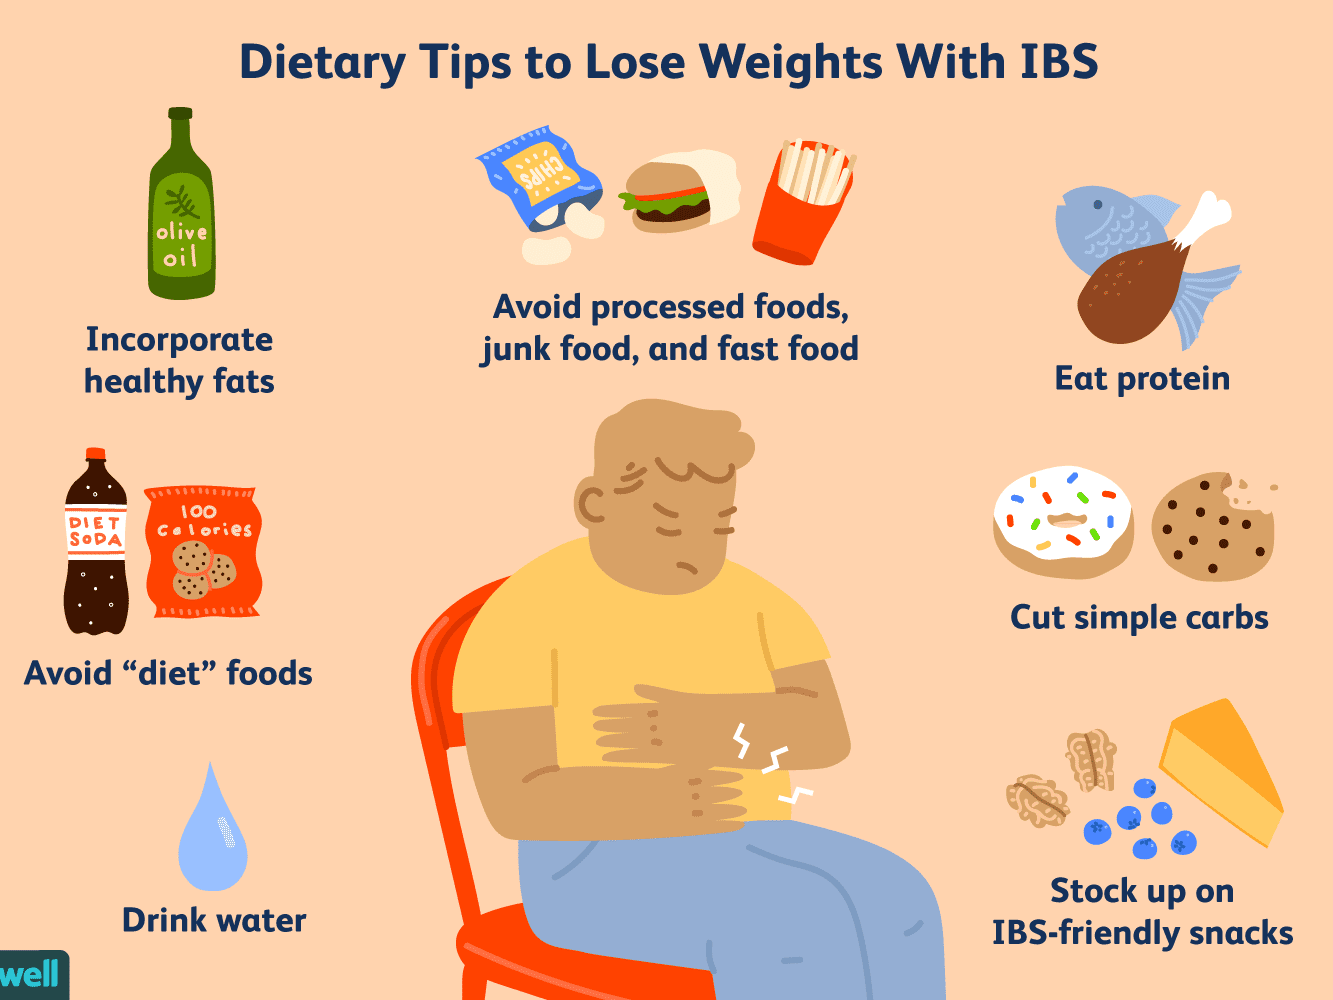 Dietary tips for losing weight with "IBS"